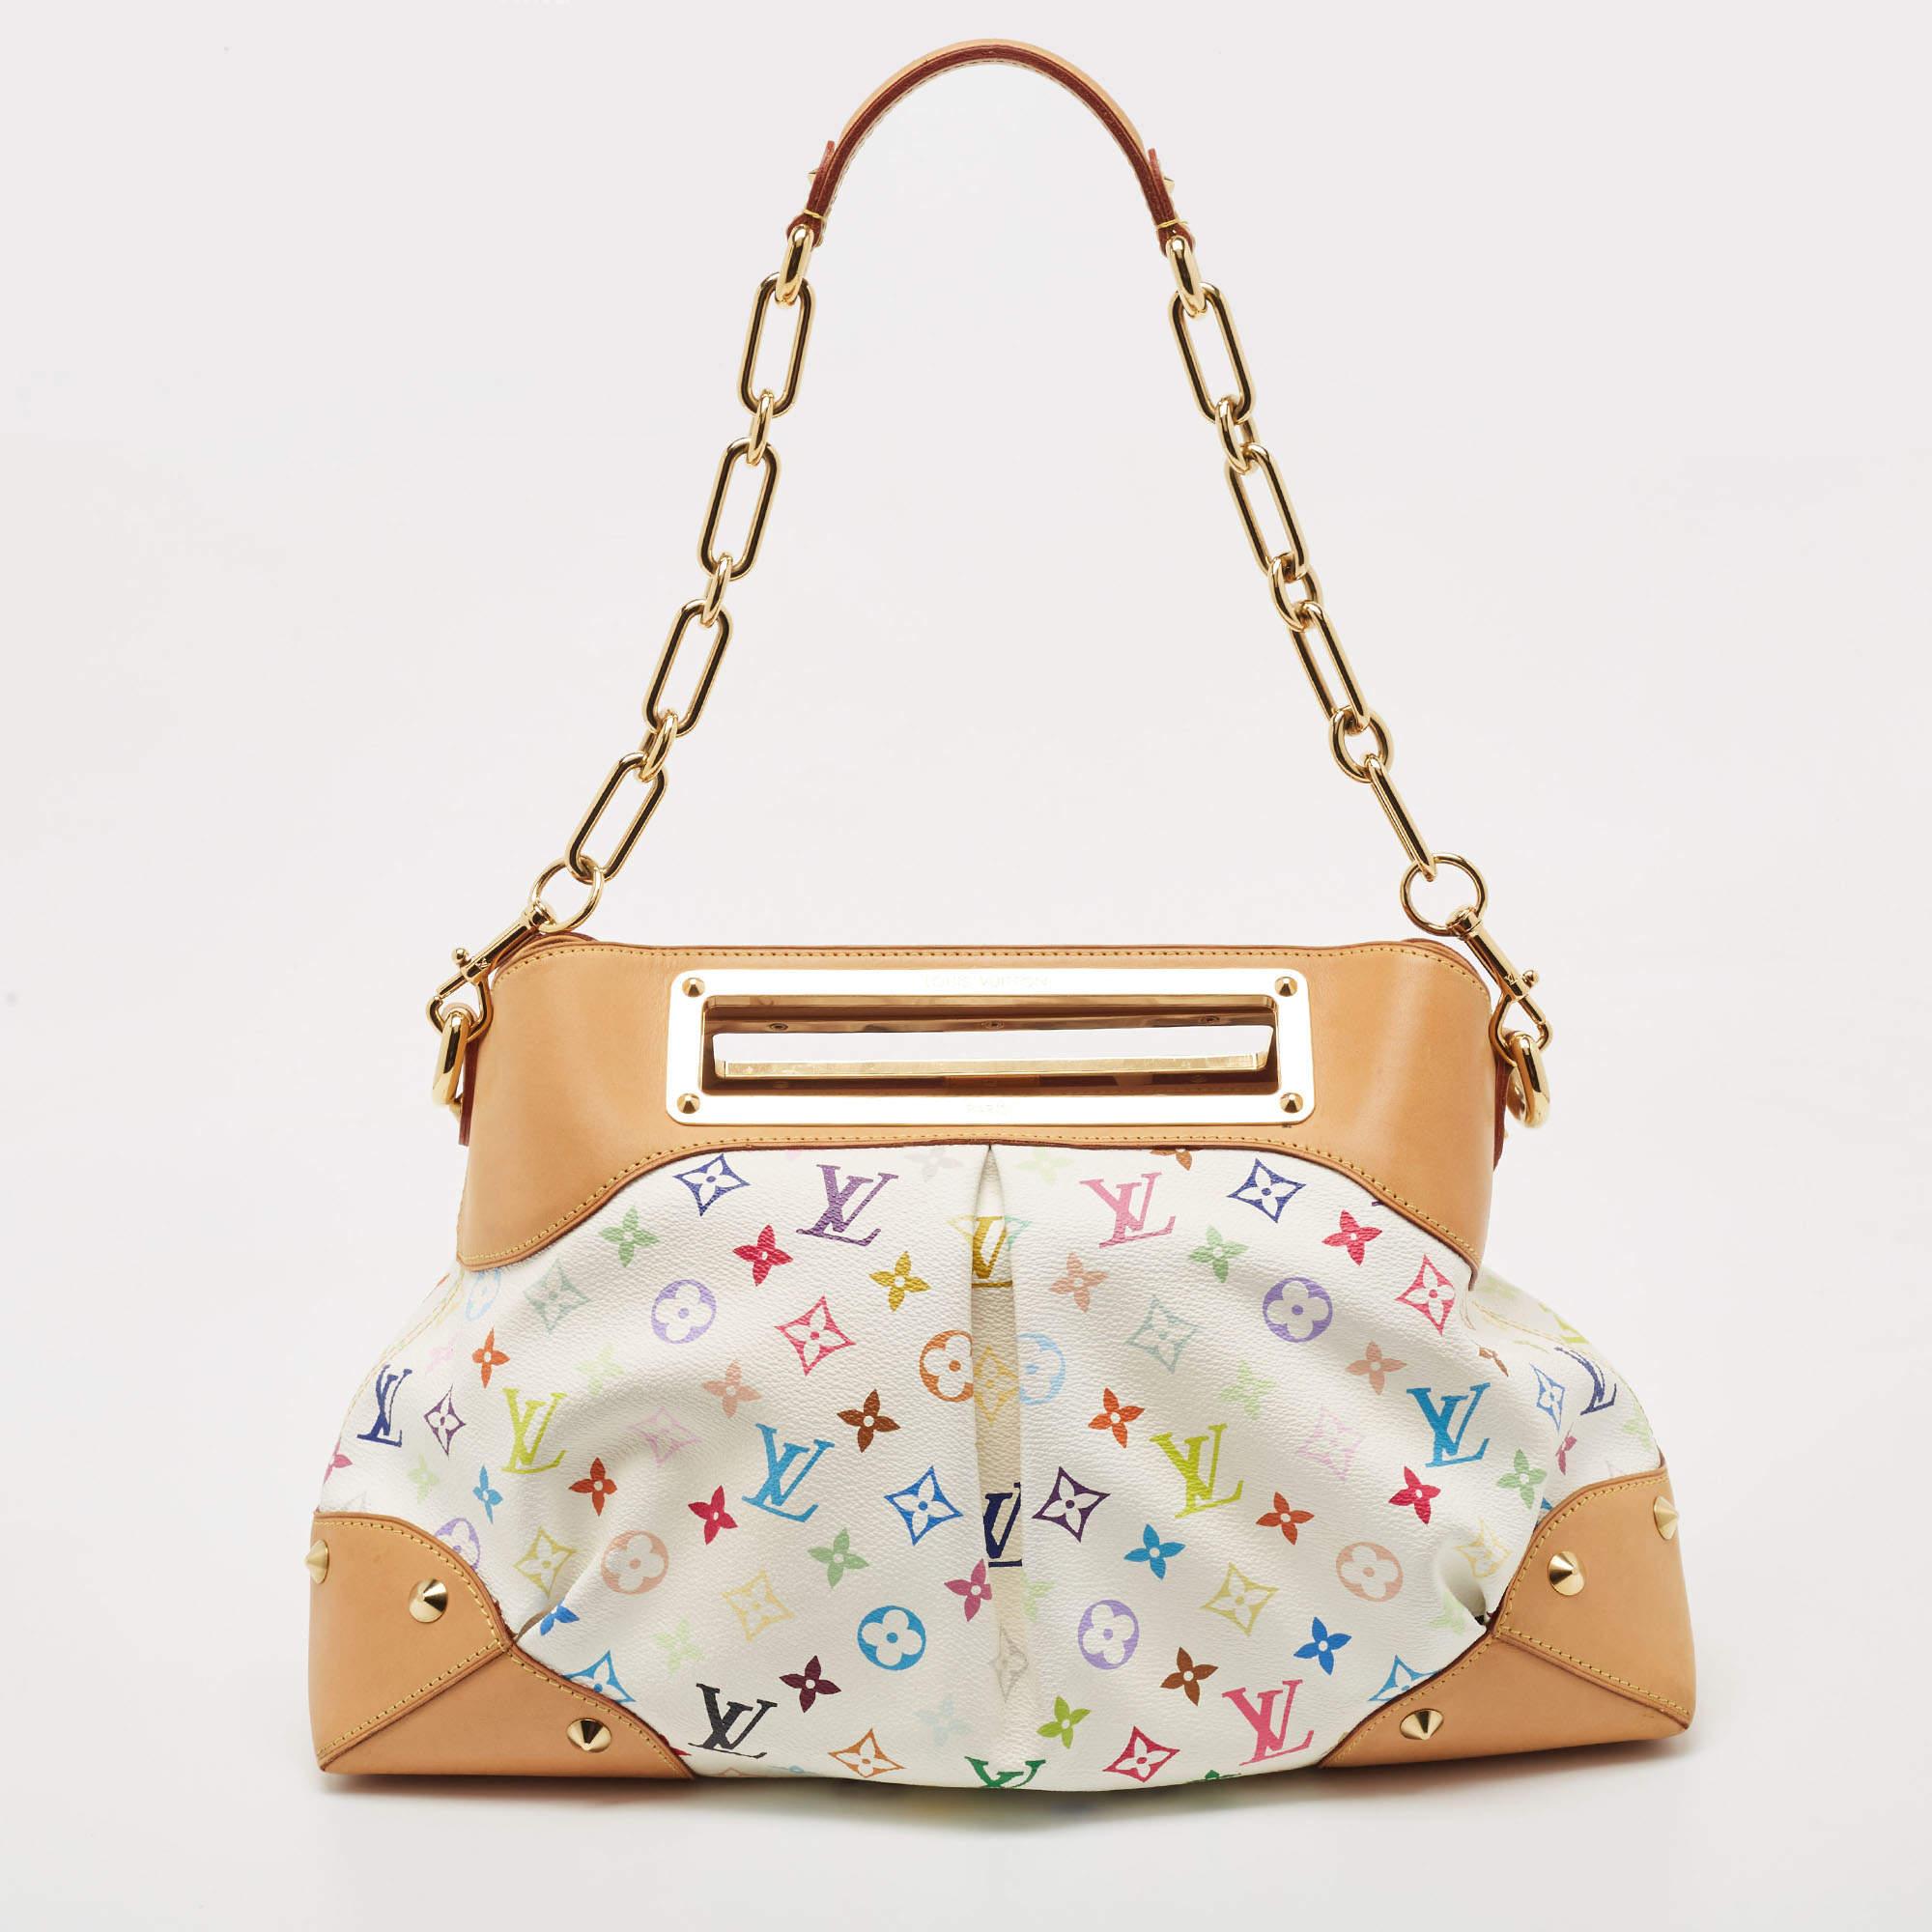 Crafted from their signature Multicolore Monogram canvas, this white Louis Vuitton bag features a detachable chain handle and frame handles engraved with the brand label. While the gold-tone hardware elevates its beauty, the Alcantara-lined interior